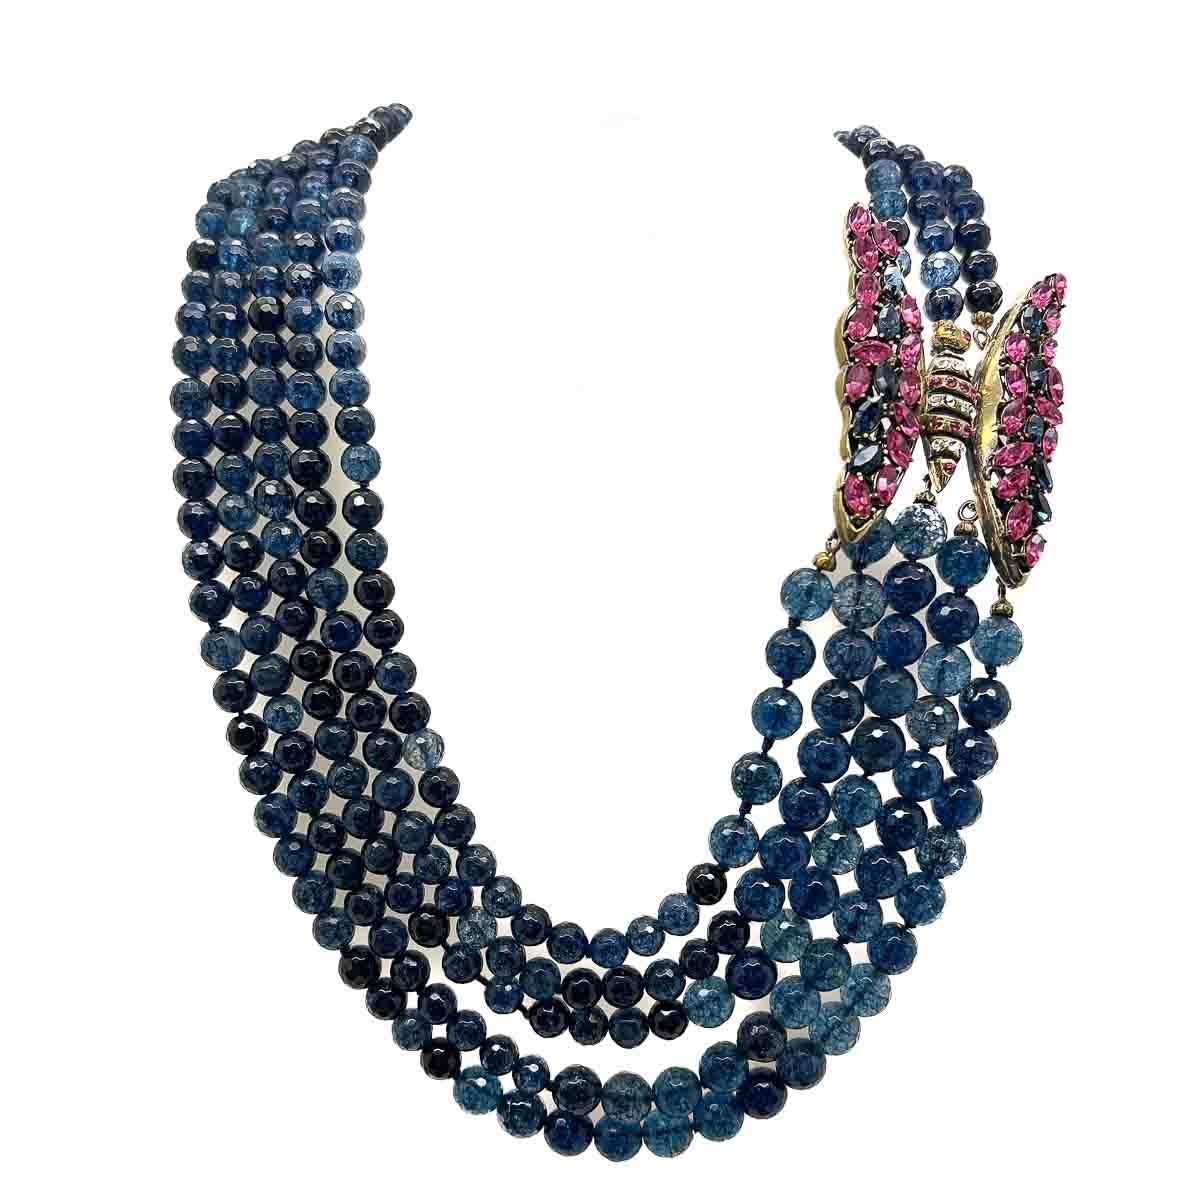 An extraordinary stunning Vintage 'Italian Vintage' Butterfly Collar and Bracelet Set. A duo of spectacular pieces of wearable art combines in this heavenly demi-parure. Heaps of deep blue glass beads create a dramatic swathe of colour and impactful